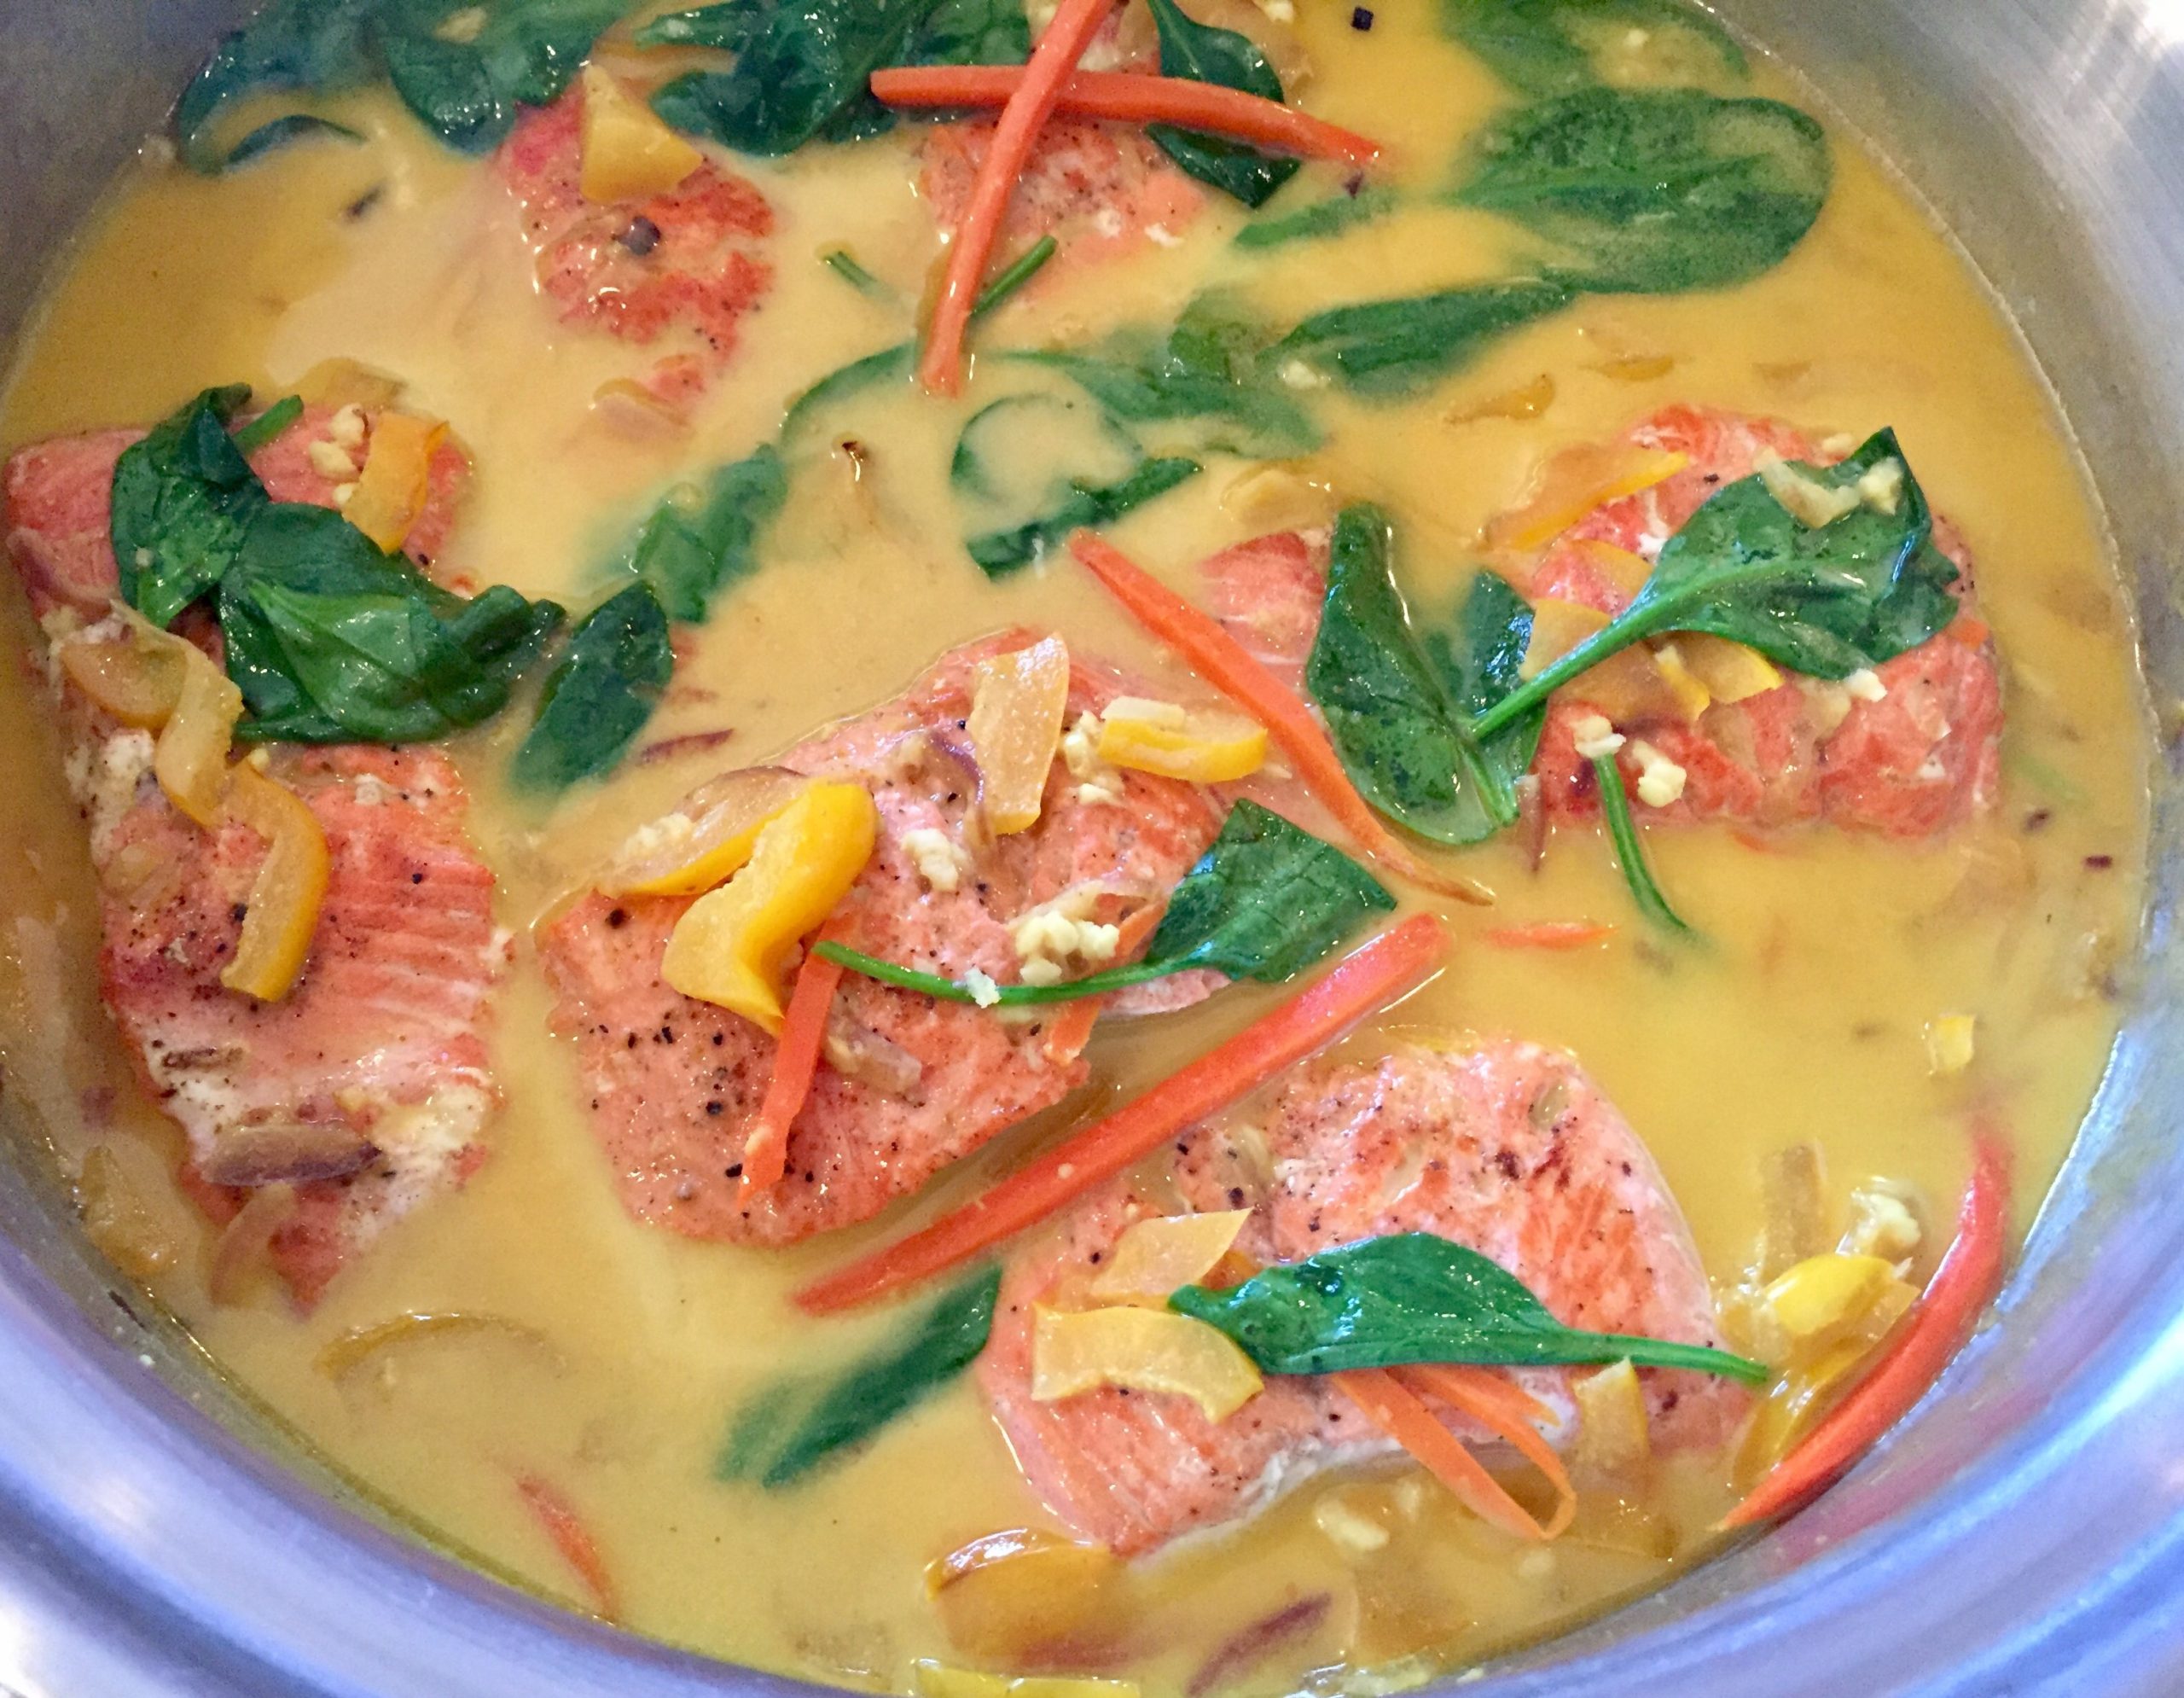 Curry Vegetables with Salmon in a bowl